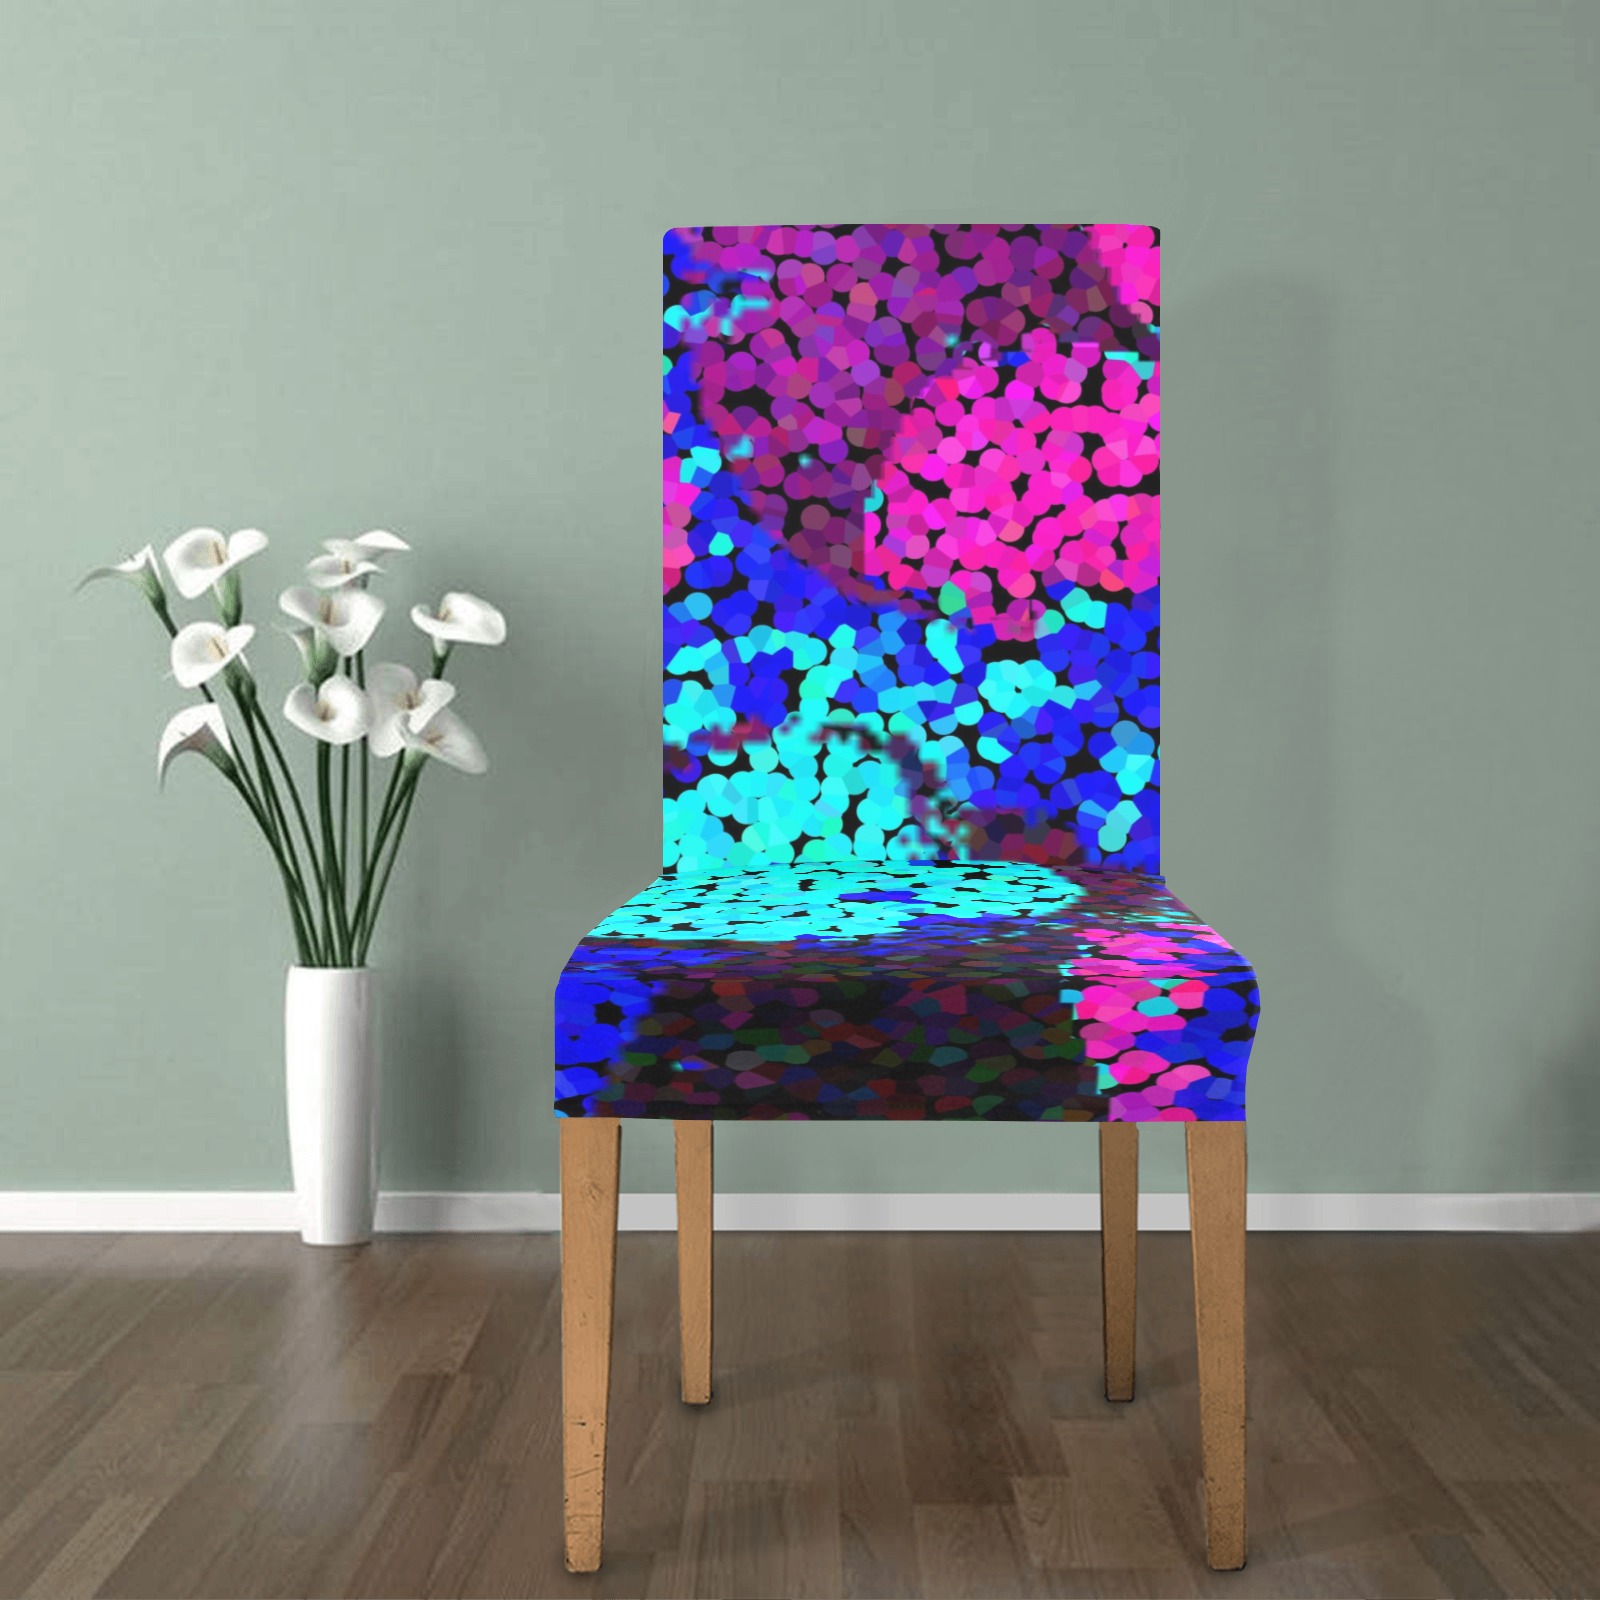 Pixelated Glitch (Pink) Removable Dining Chair Cover